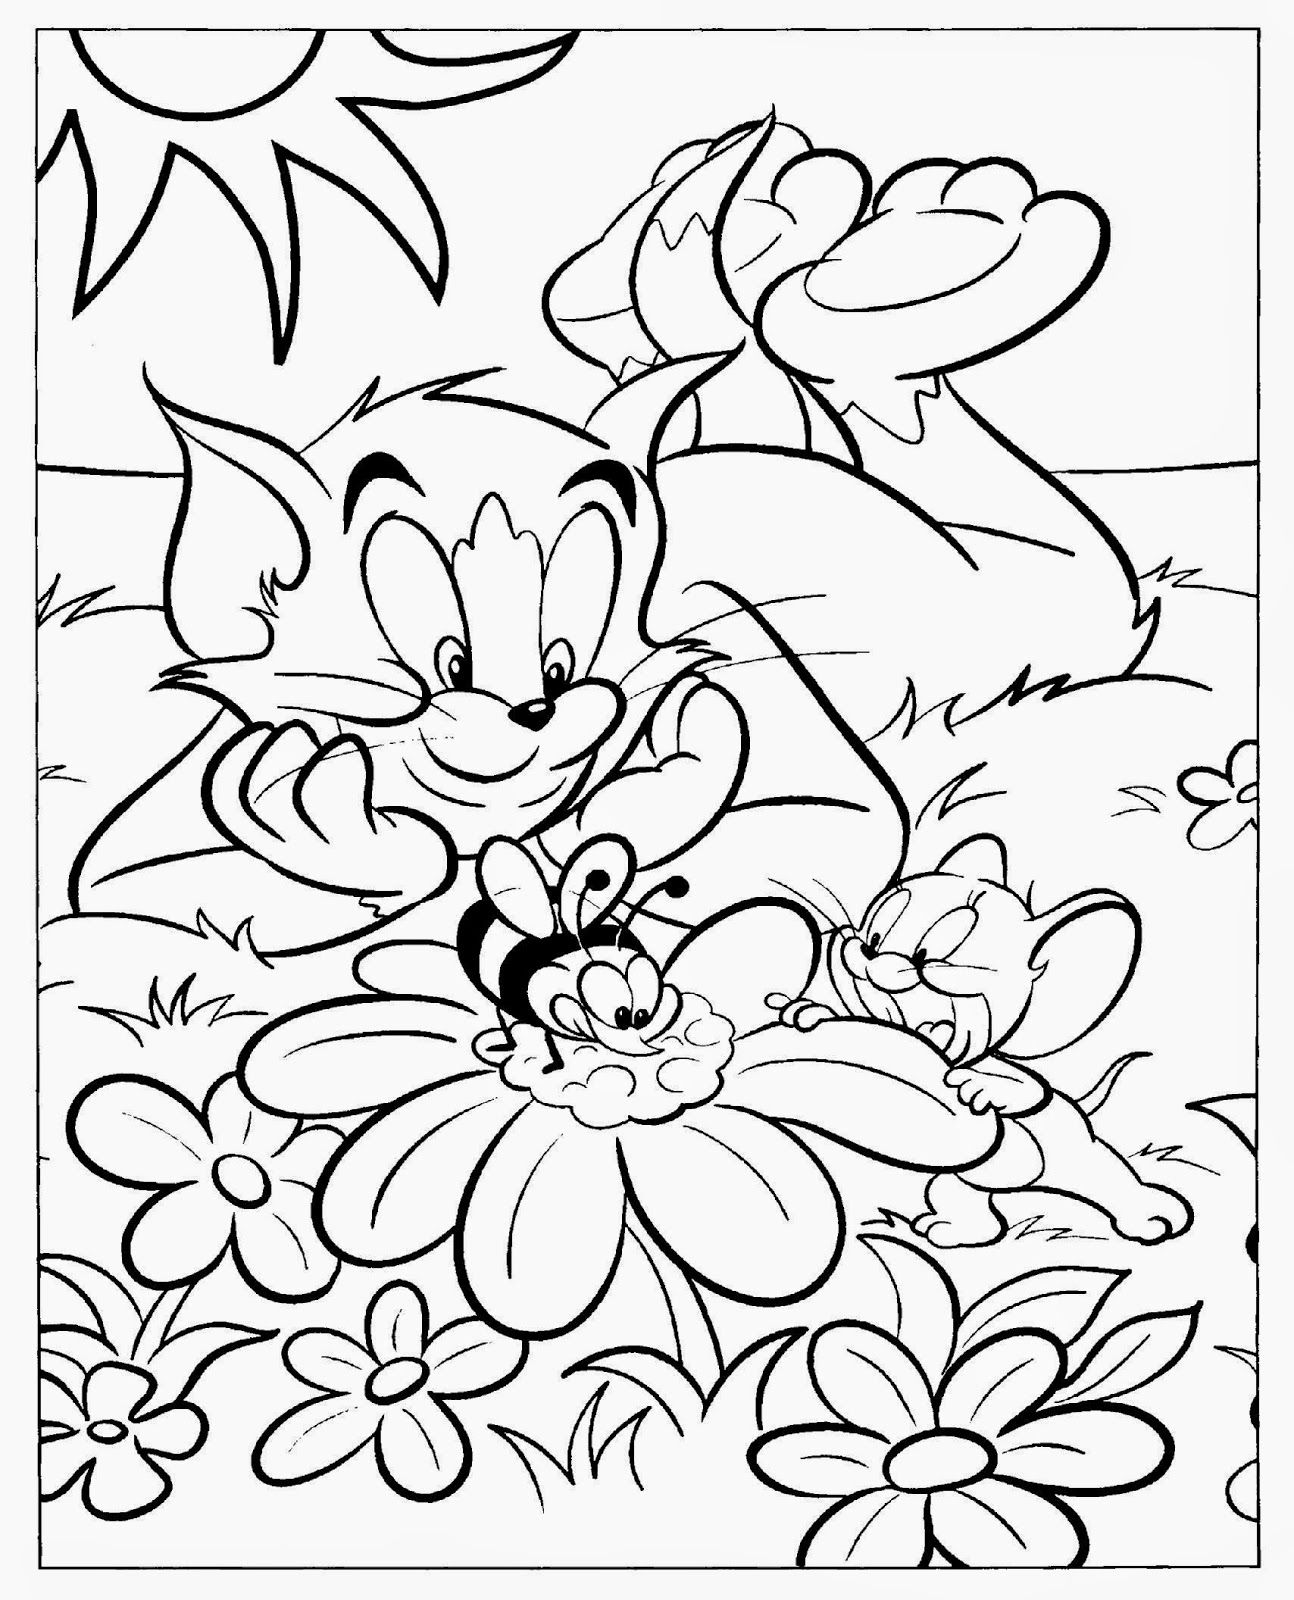 Cartoon Network Characters Coloring Pages Coloring Pages